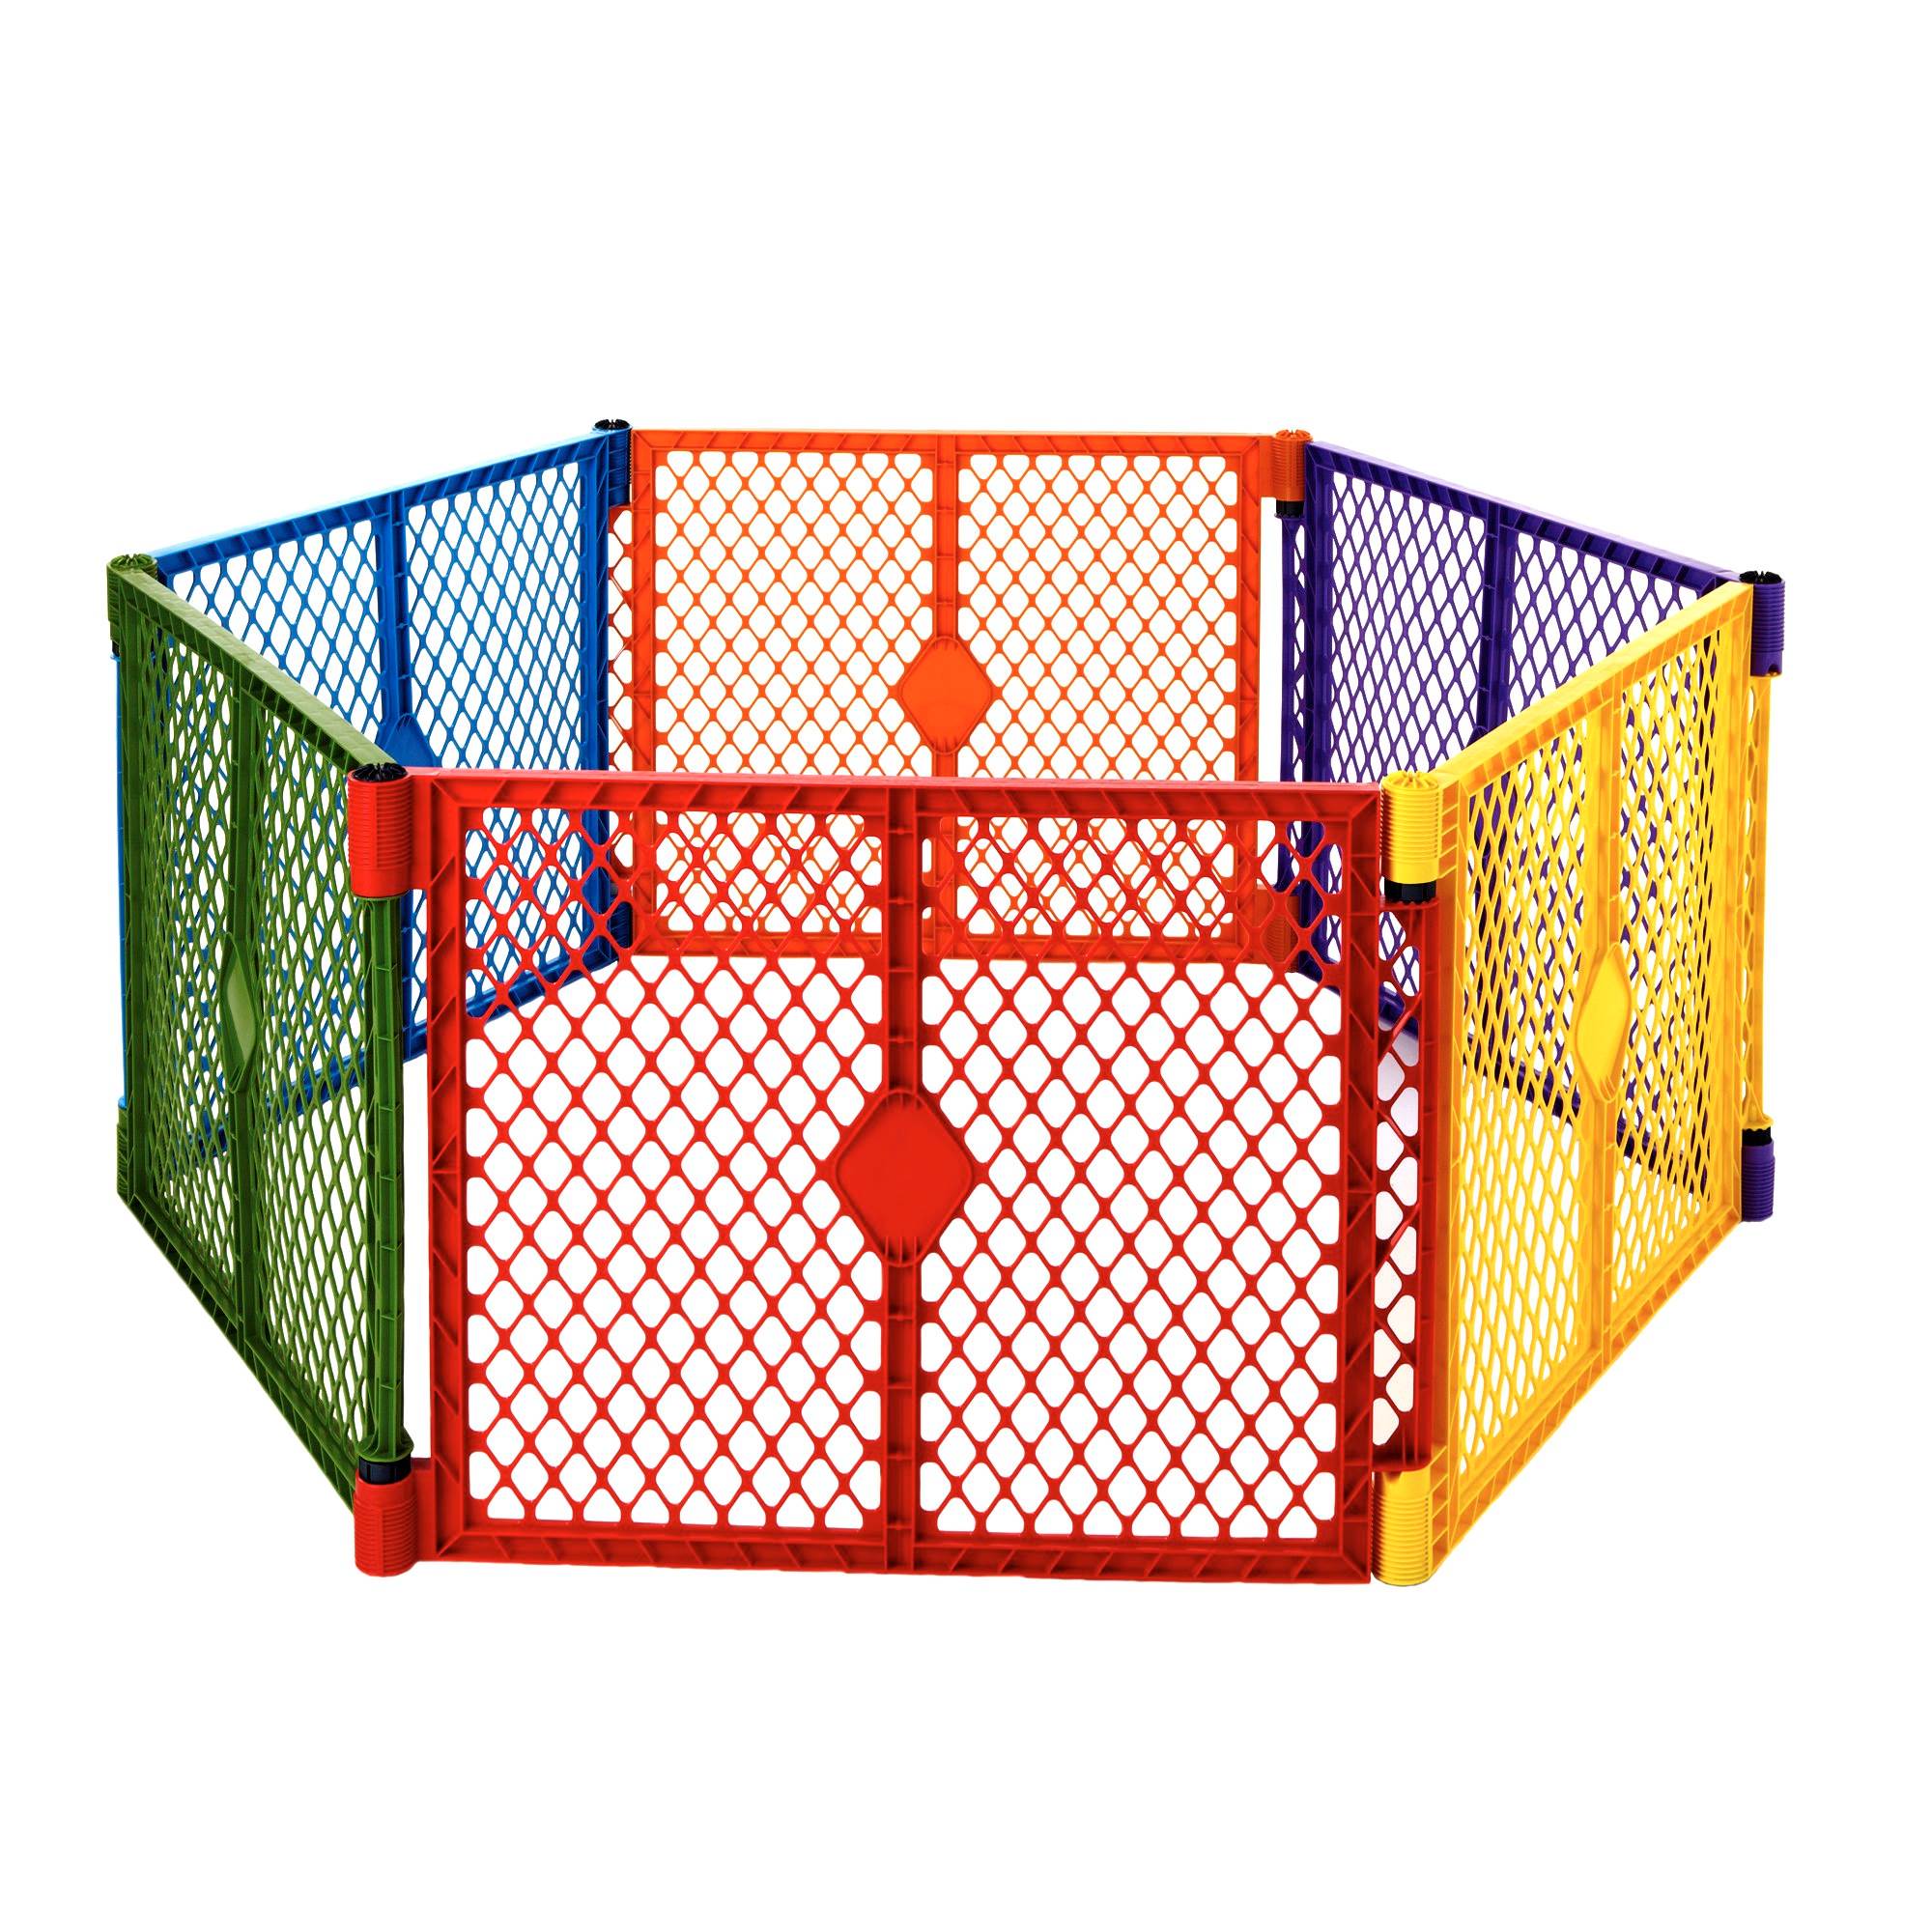 Toddleroo by North States Superyard Colorplay Baby Play Yard, Multicolor Plastic - image 1 of 7